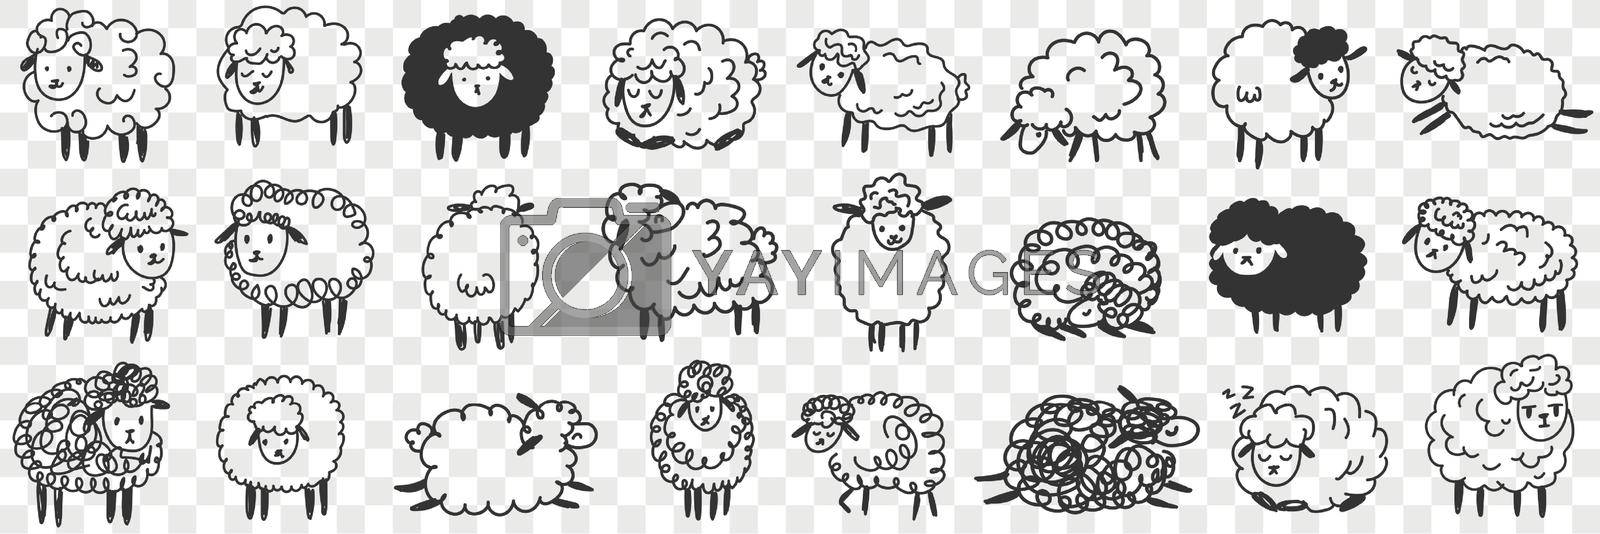 Funny white and black sheep animals doodle set. Collection of hand drawn various funny cute fluffy sheets in farms in different poses enjoying life isolated on transparent background